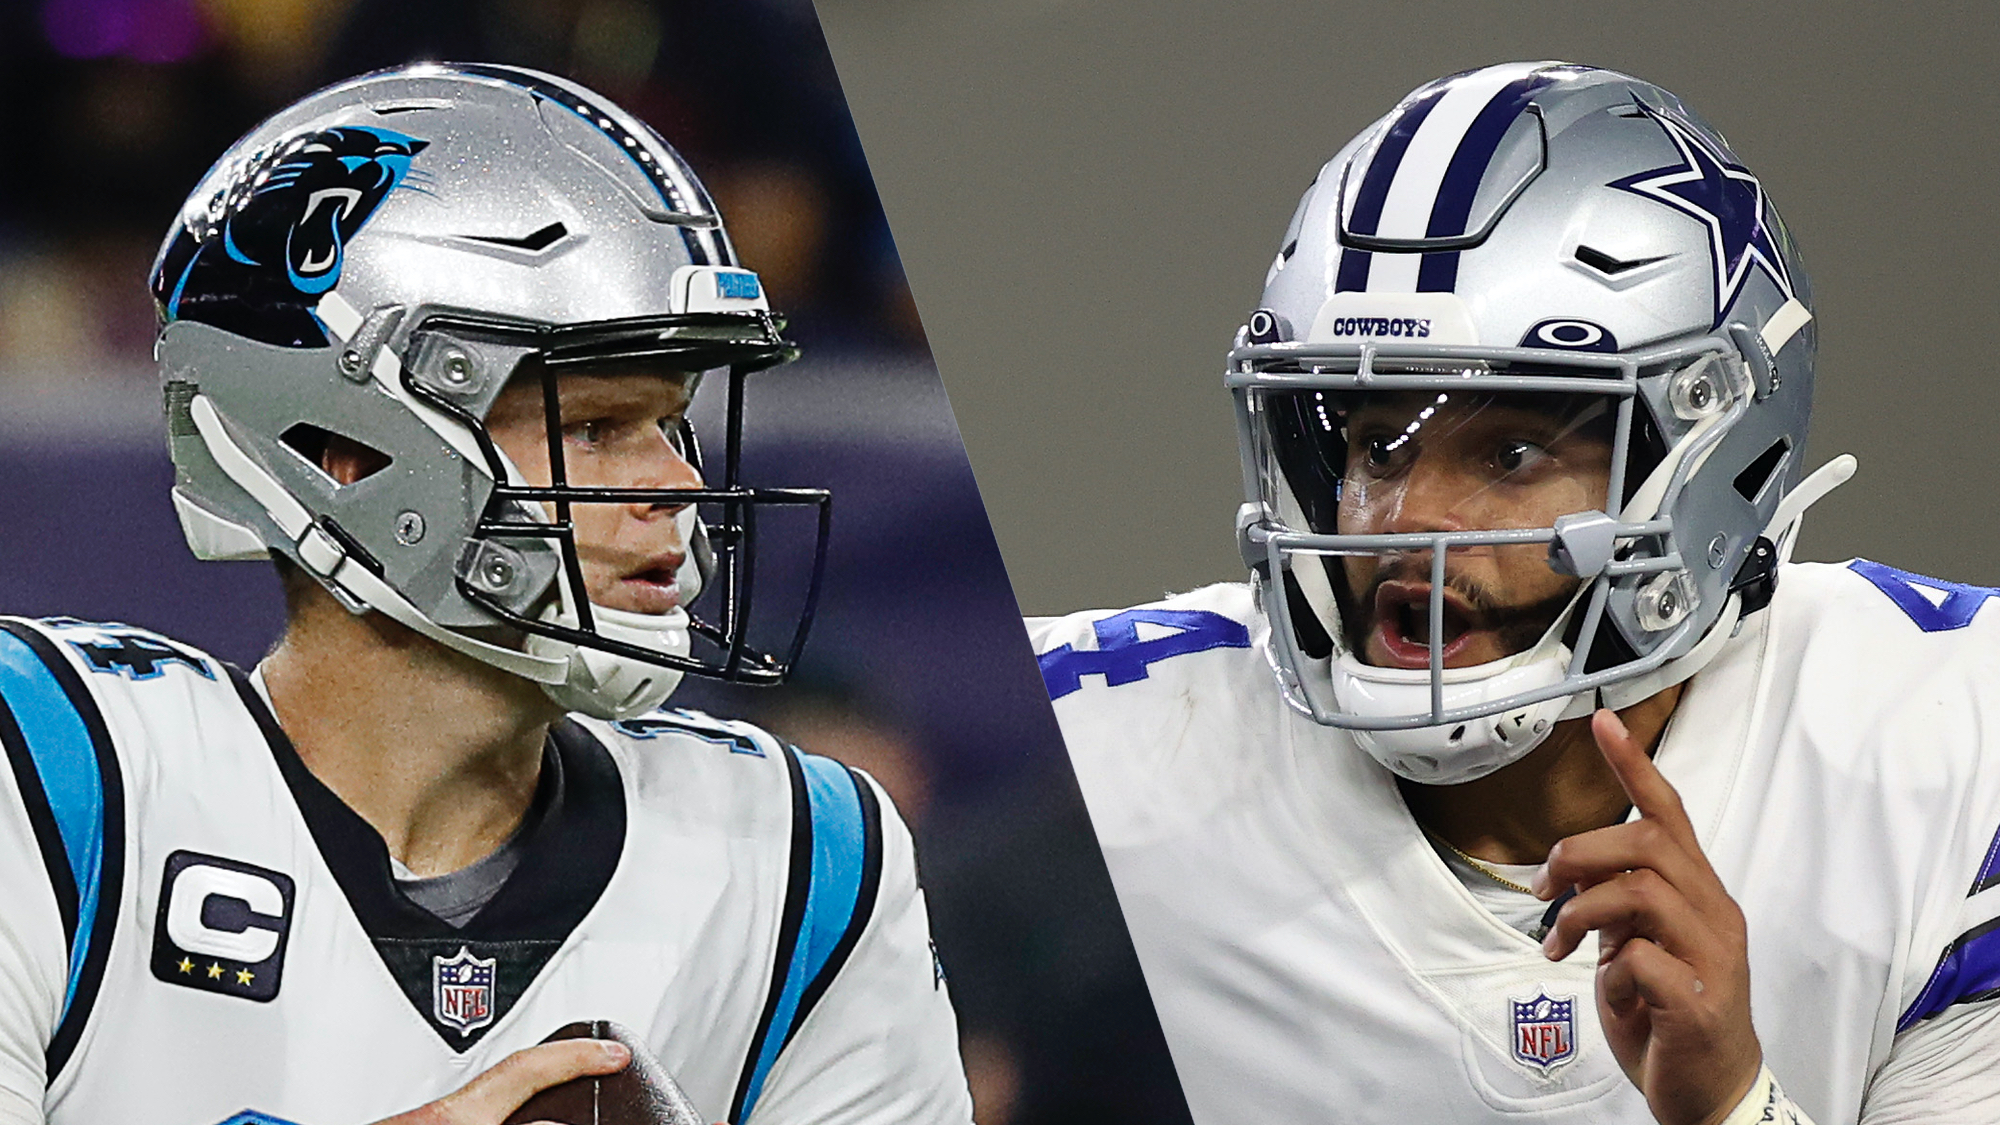 Panthers vs Cowboys live stream is here: How to watch NFL week 4